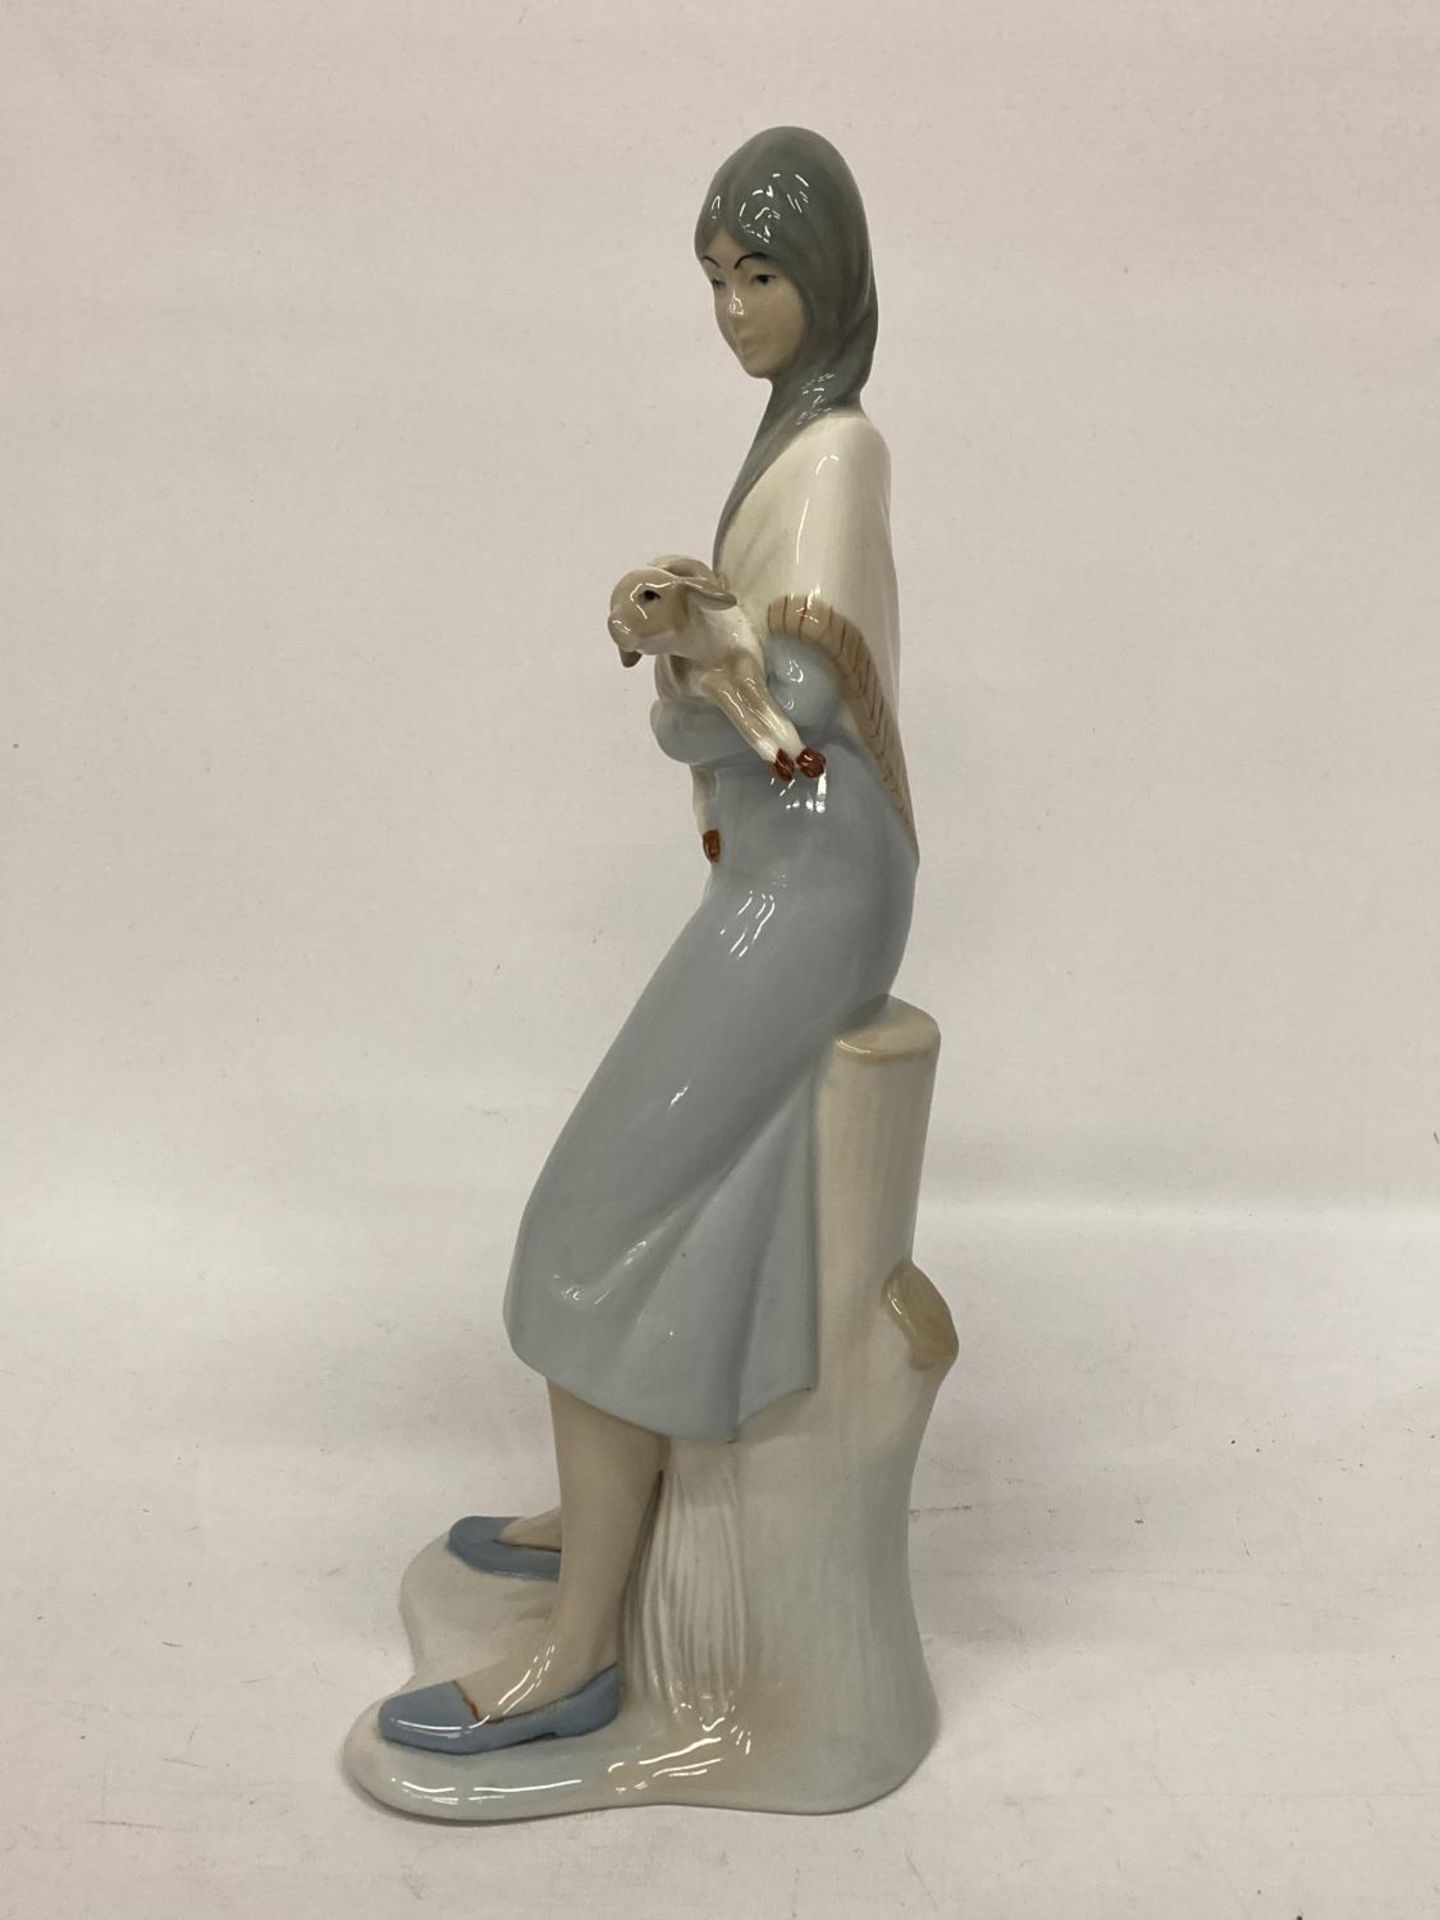 A LLADRO STYLE LADY FIGURE HOLDING A LAMB - Image 4 of 4